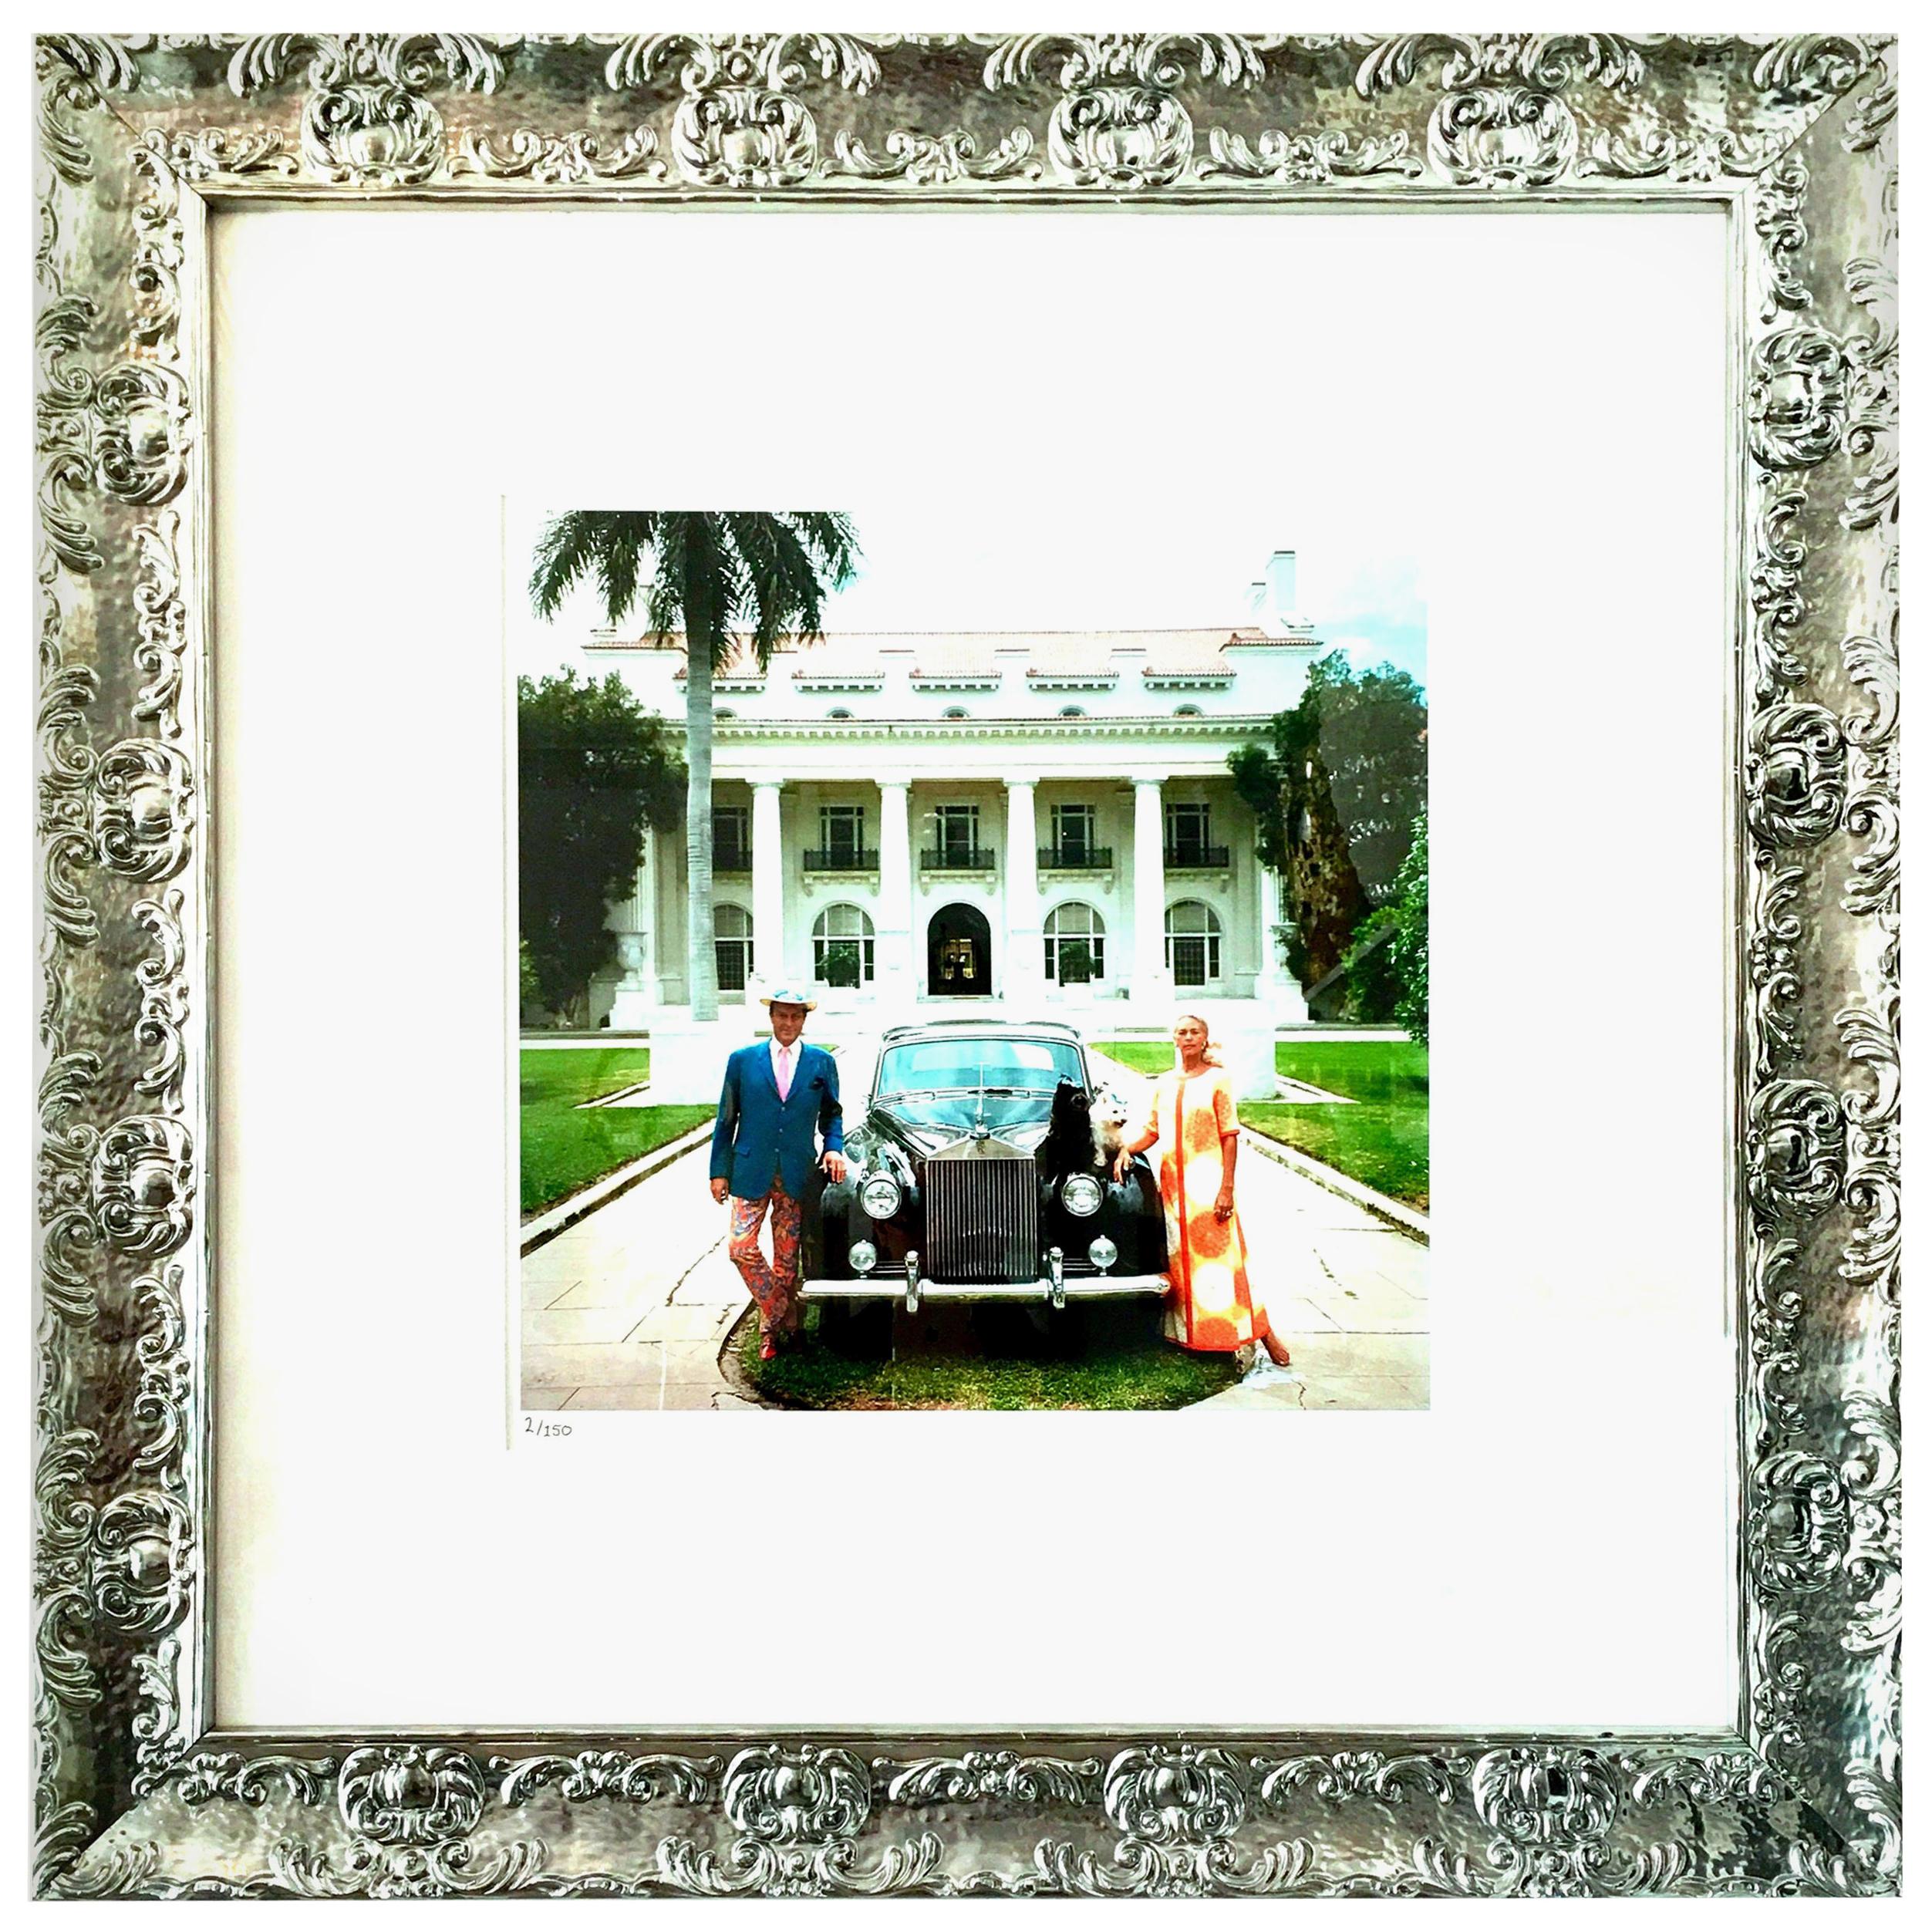 1968 Slim Aarons Photograph "Donald Leas Palm Beach" Estate Stamped LE 2/150 For Sale